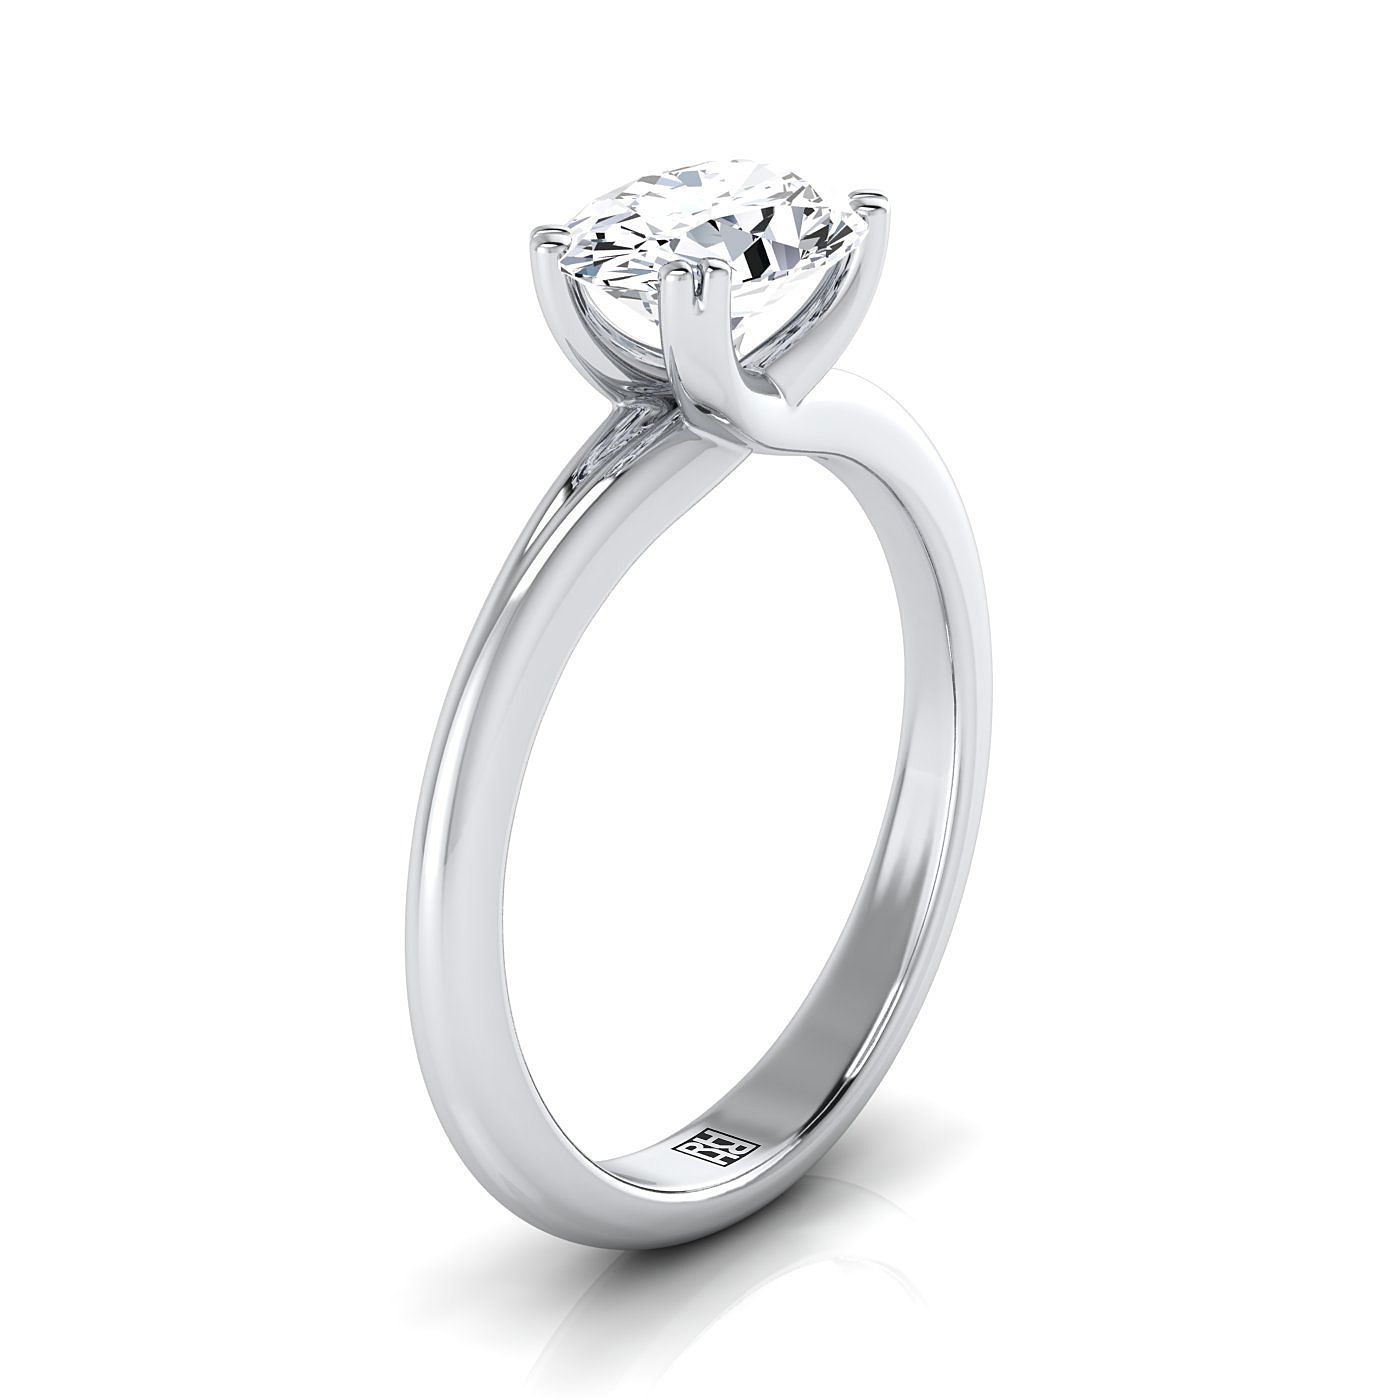 14K White Gold Oval East West Eight Claw Comfort Fit Solitaire Engagement Ring